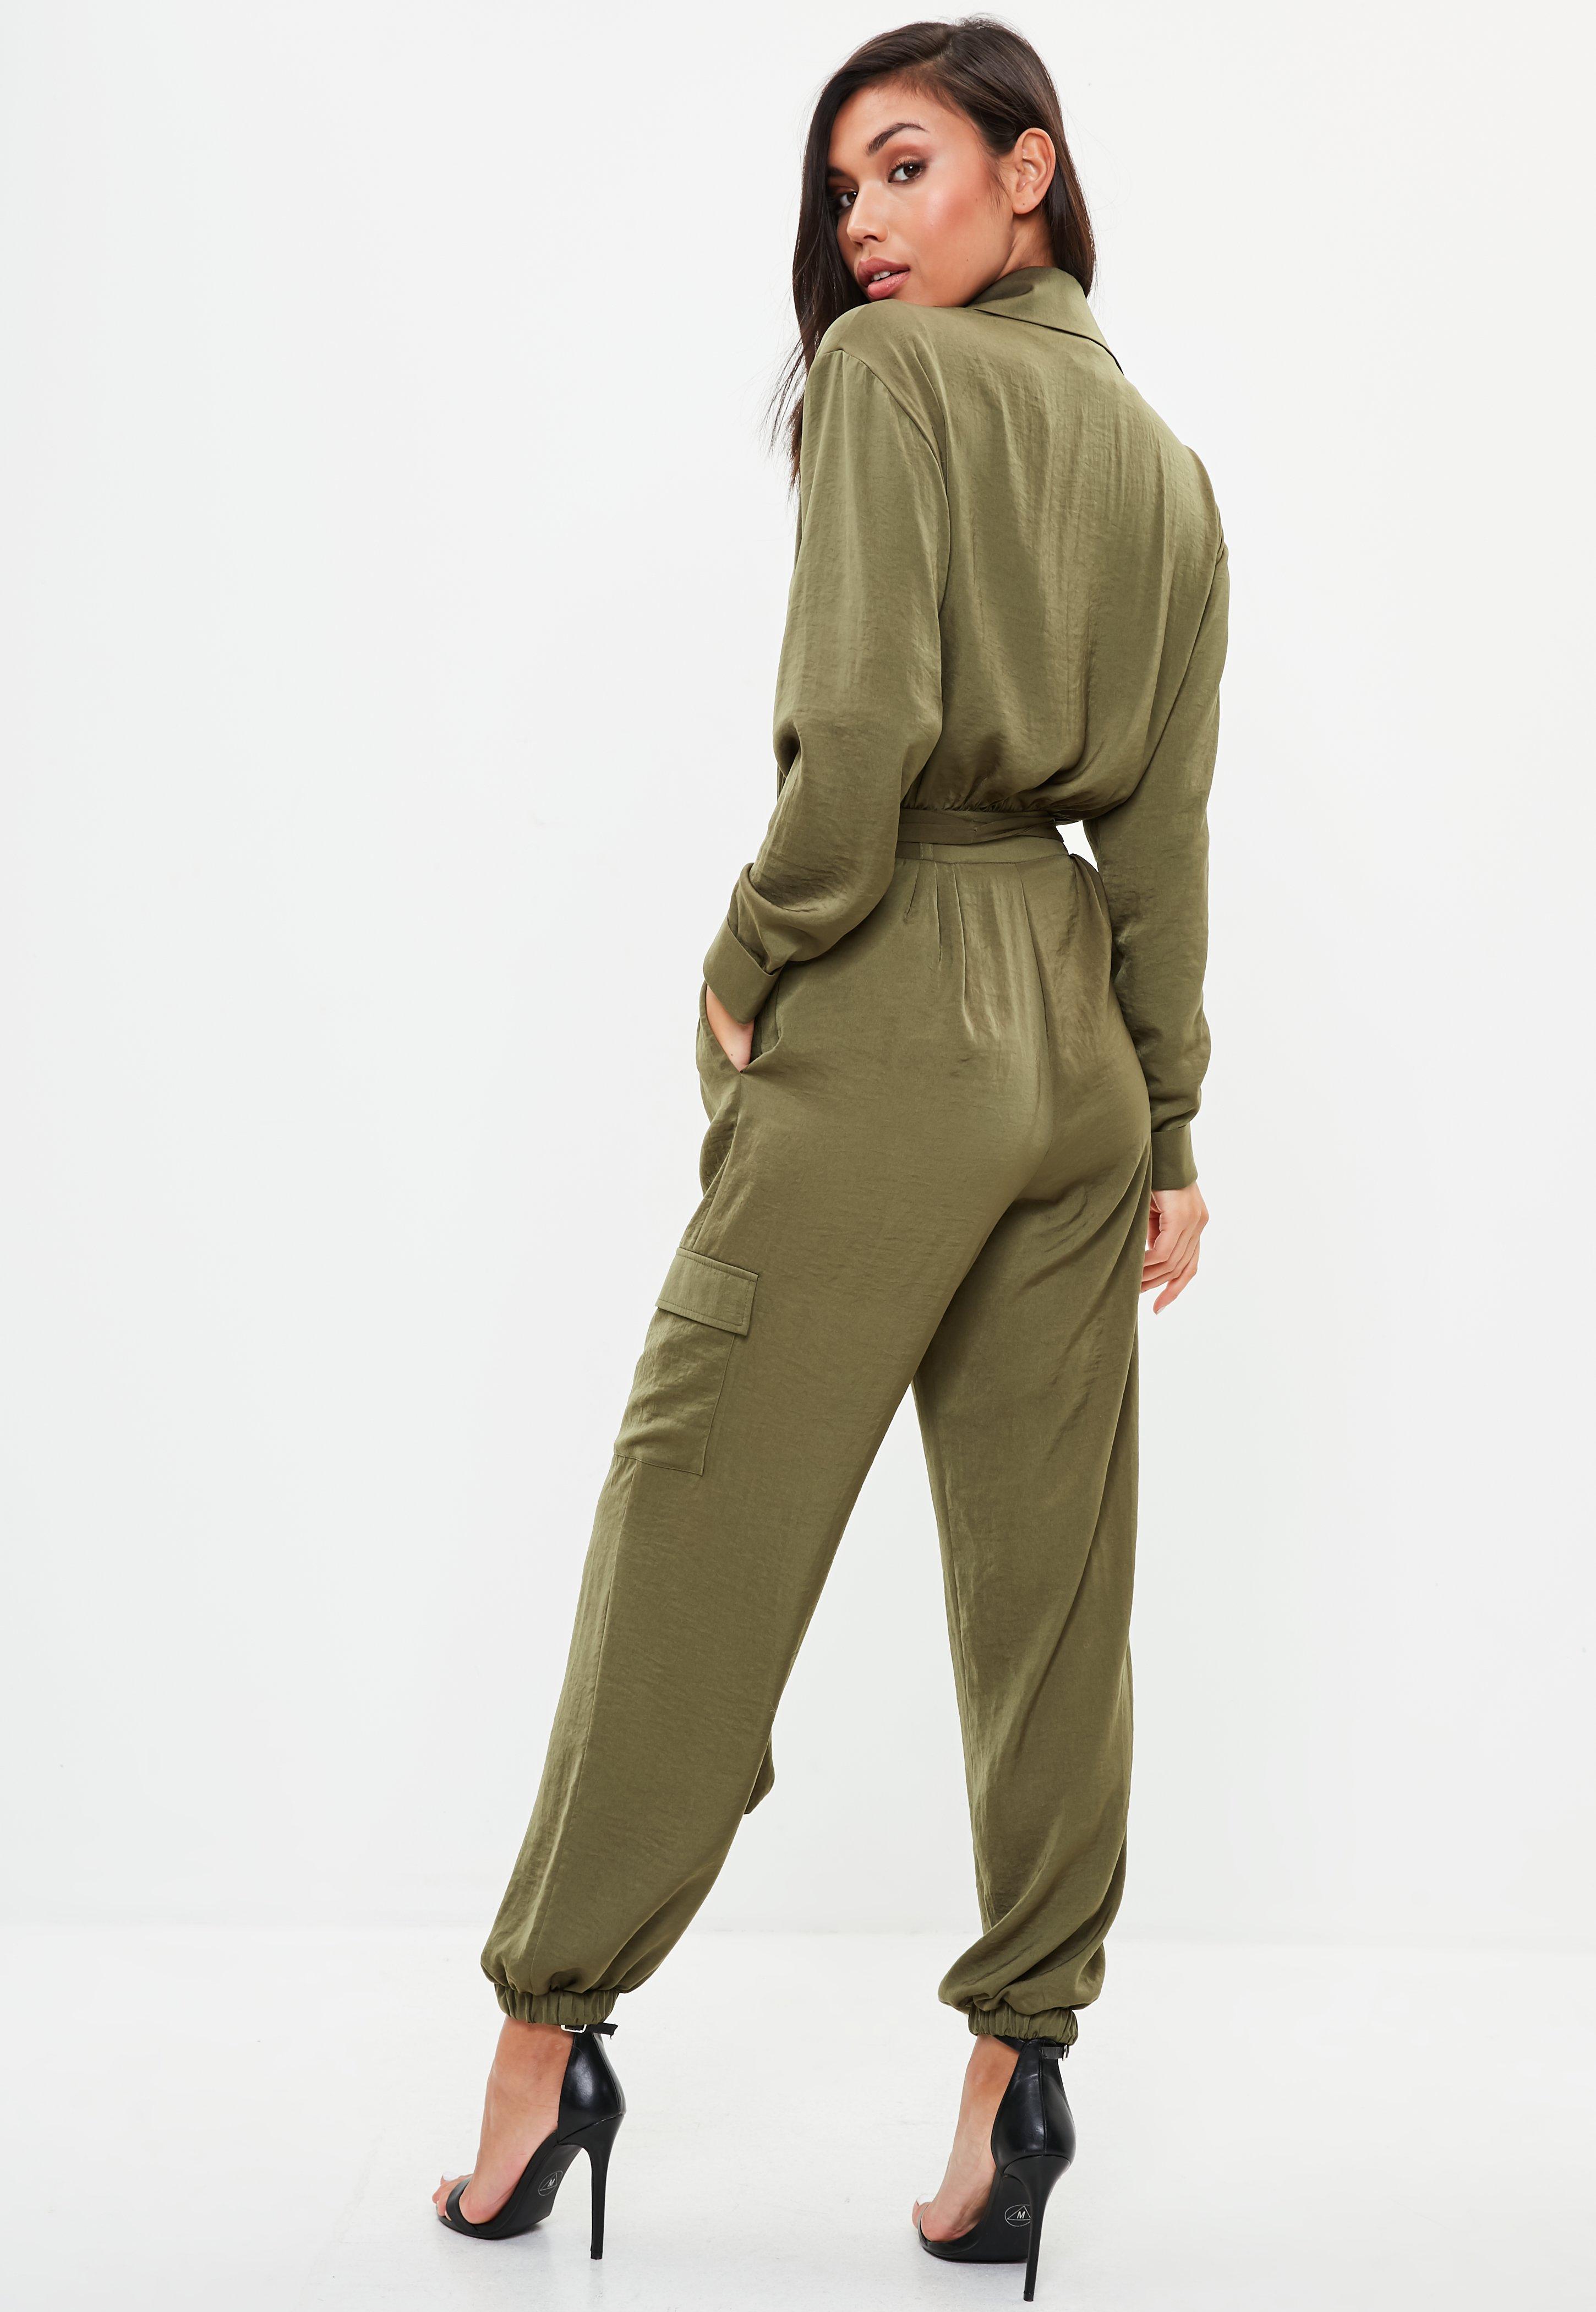 Lyst - Missguided Khaki Satin Utility Jumpsuit in Green